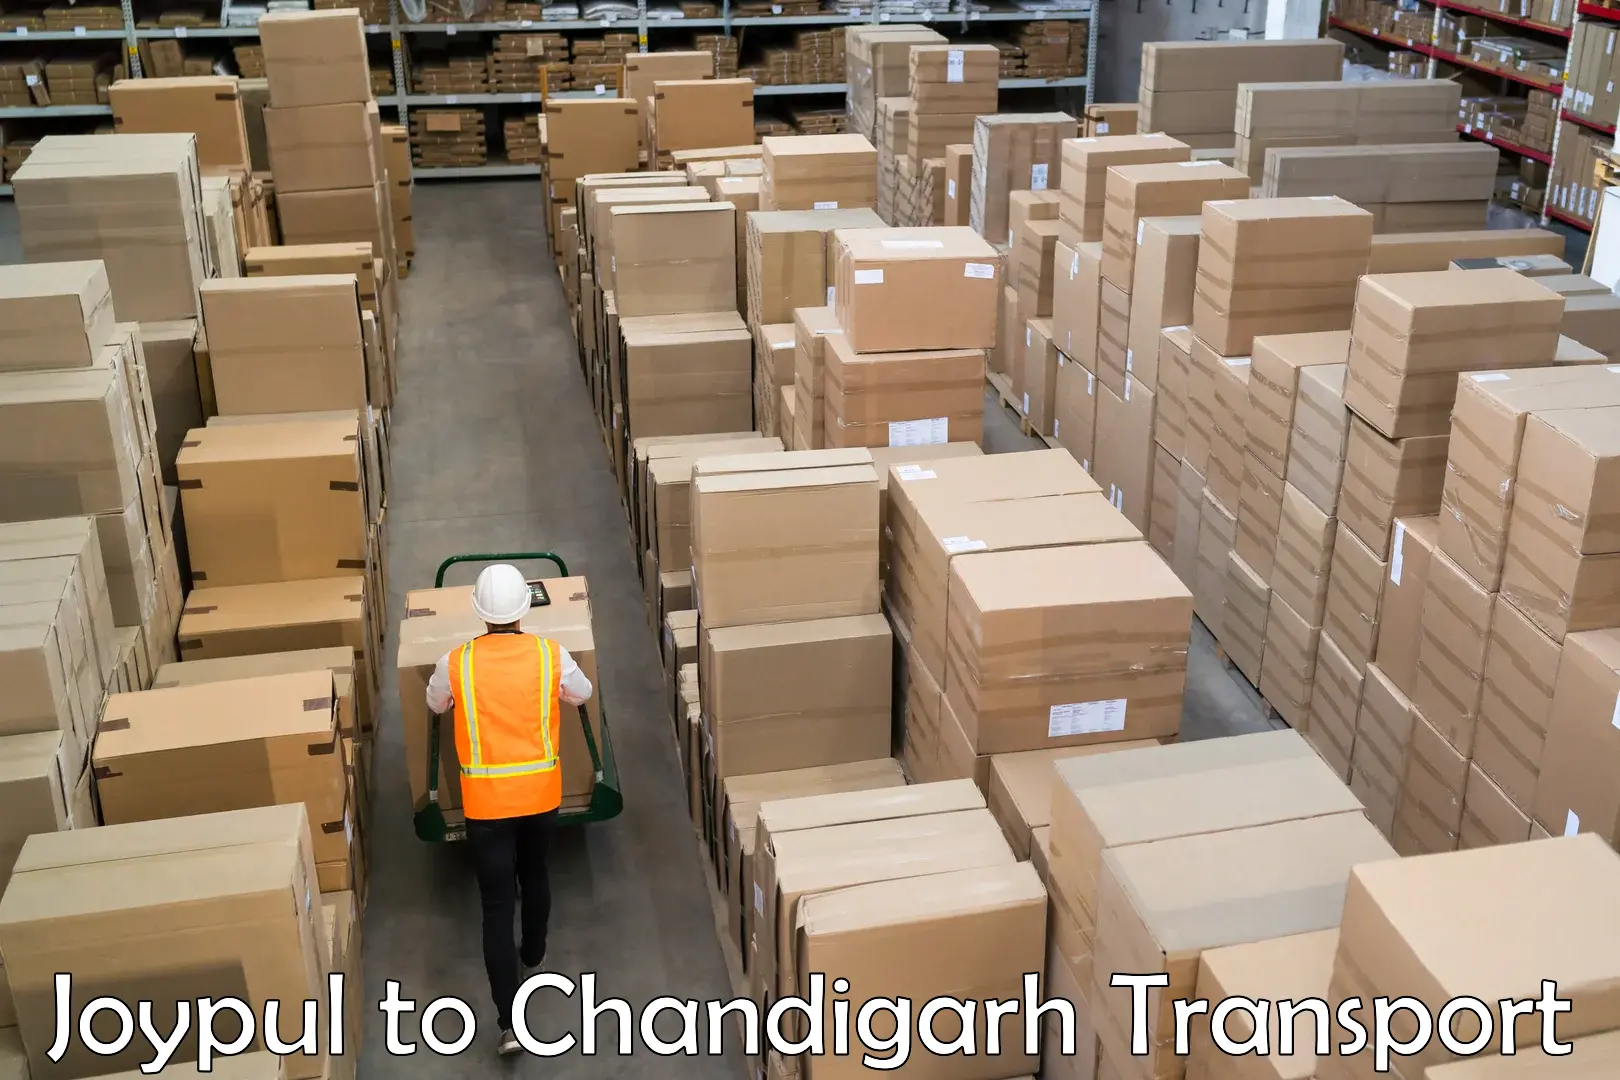 Truck transport companies in India Joypul to Chandigarh